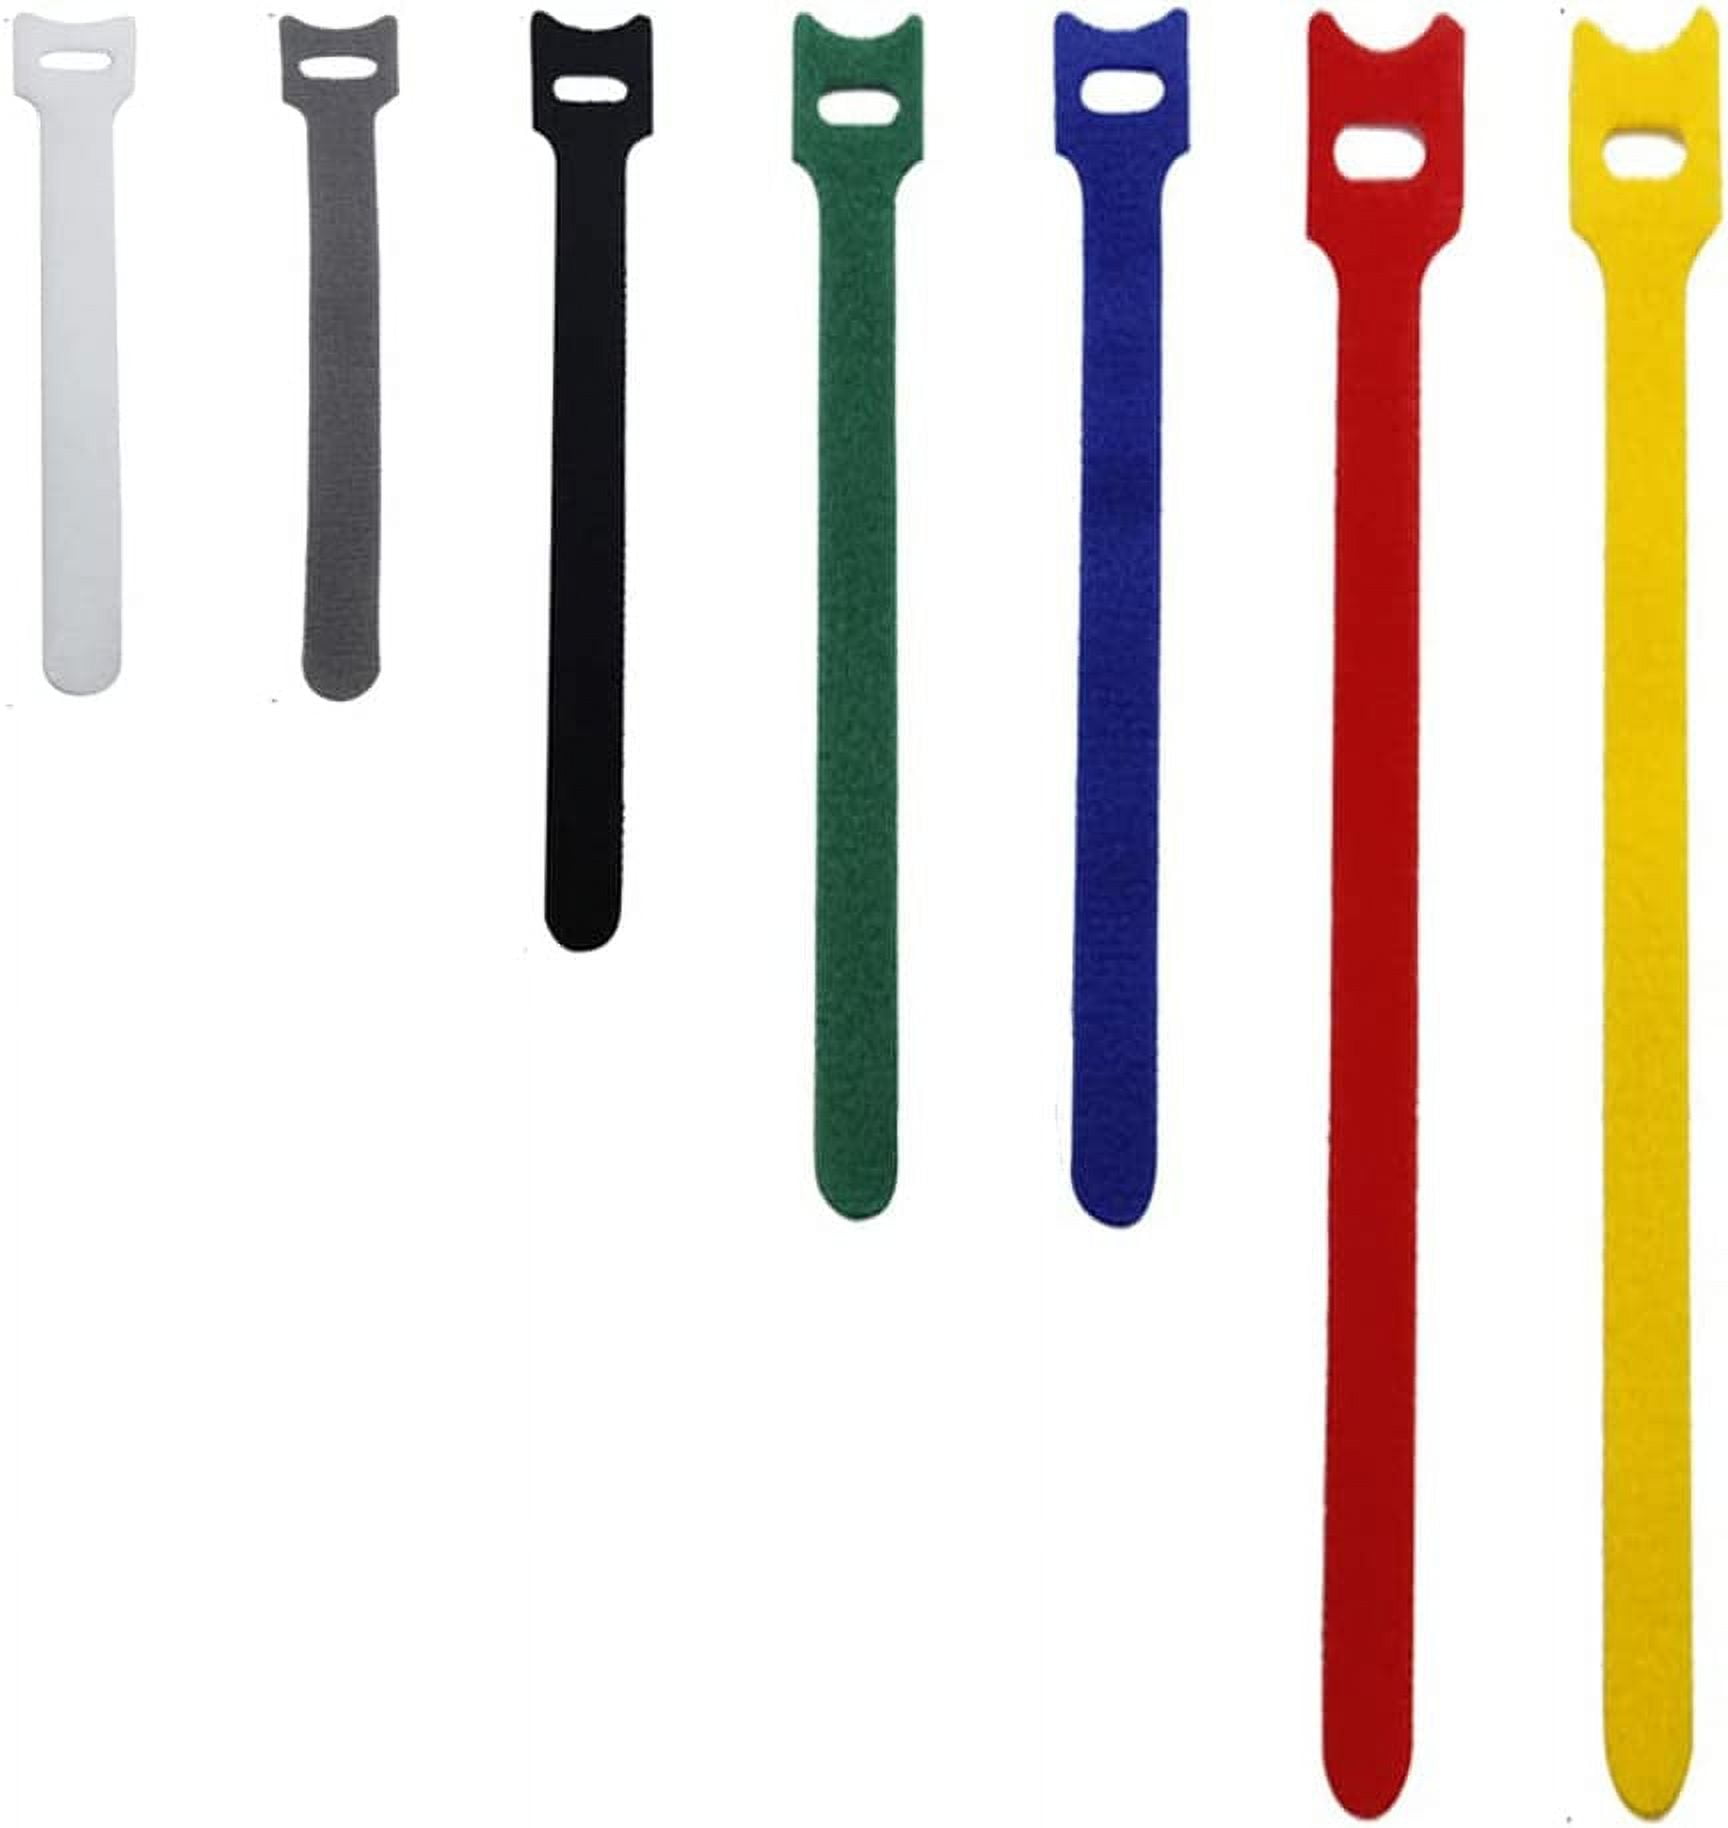 80PCS Reusable Fastening Cable Ties with Hook and Loop, Adjustable Cord  organizer Ties for Computer/TV/Electronics, 4 Sizes 4/6/8/12 inch and 7  Colors